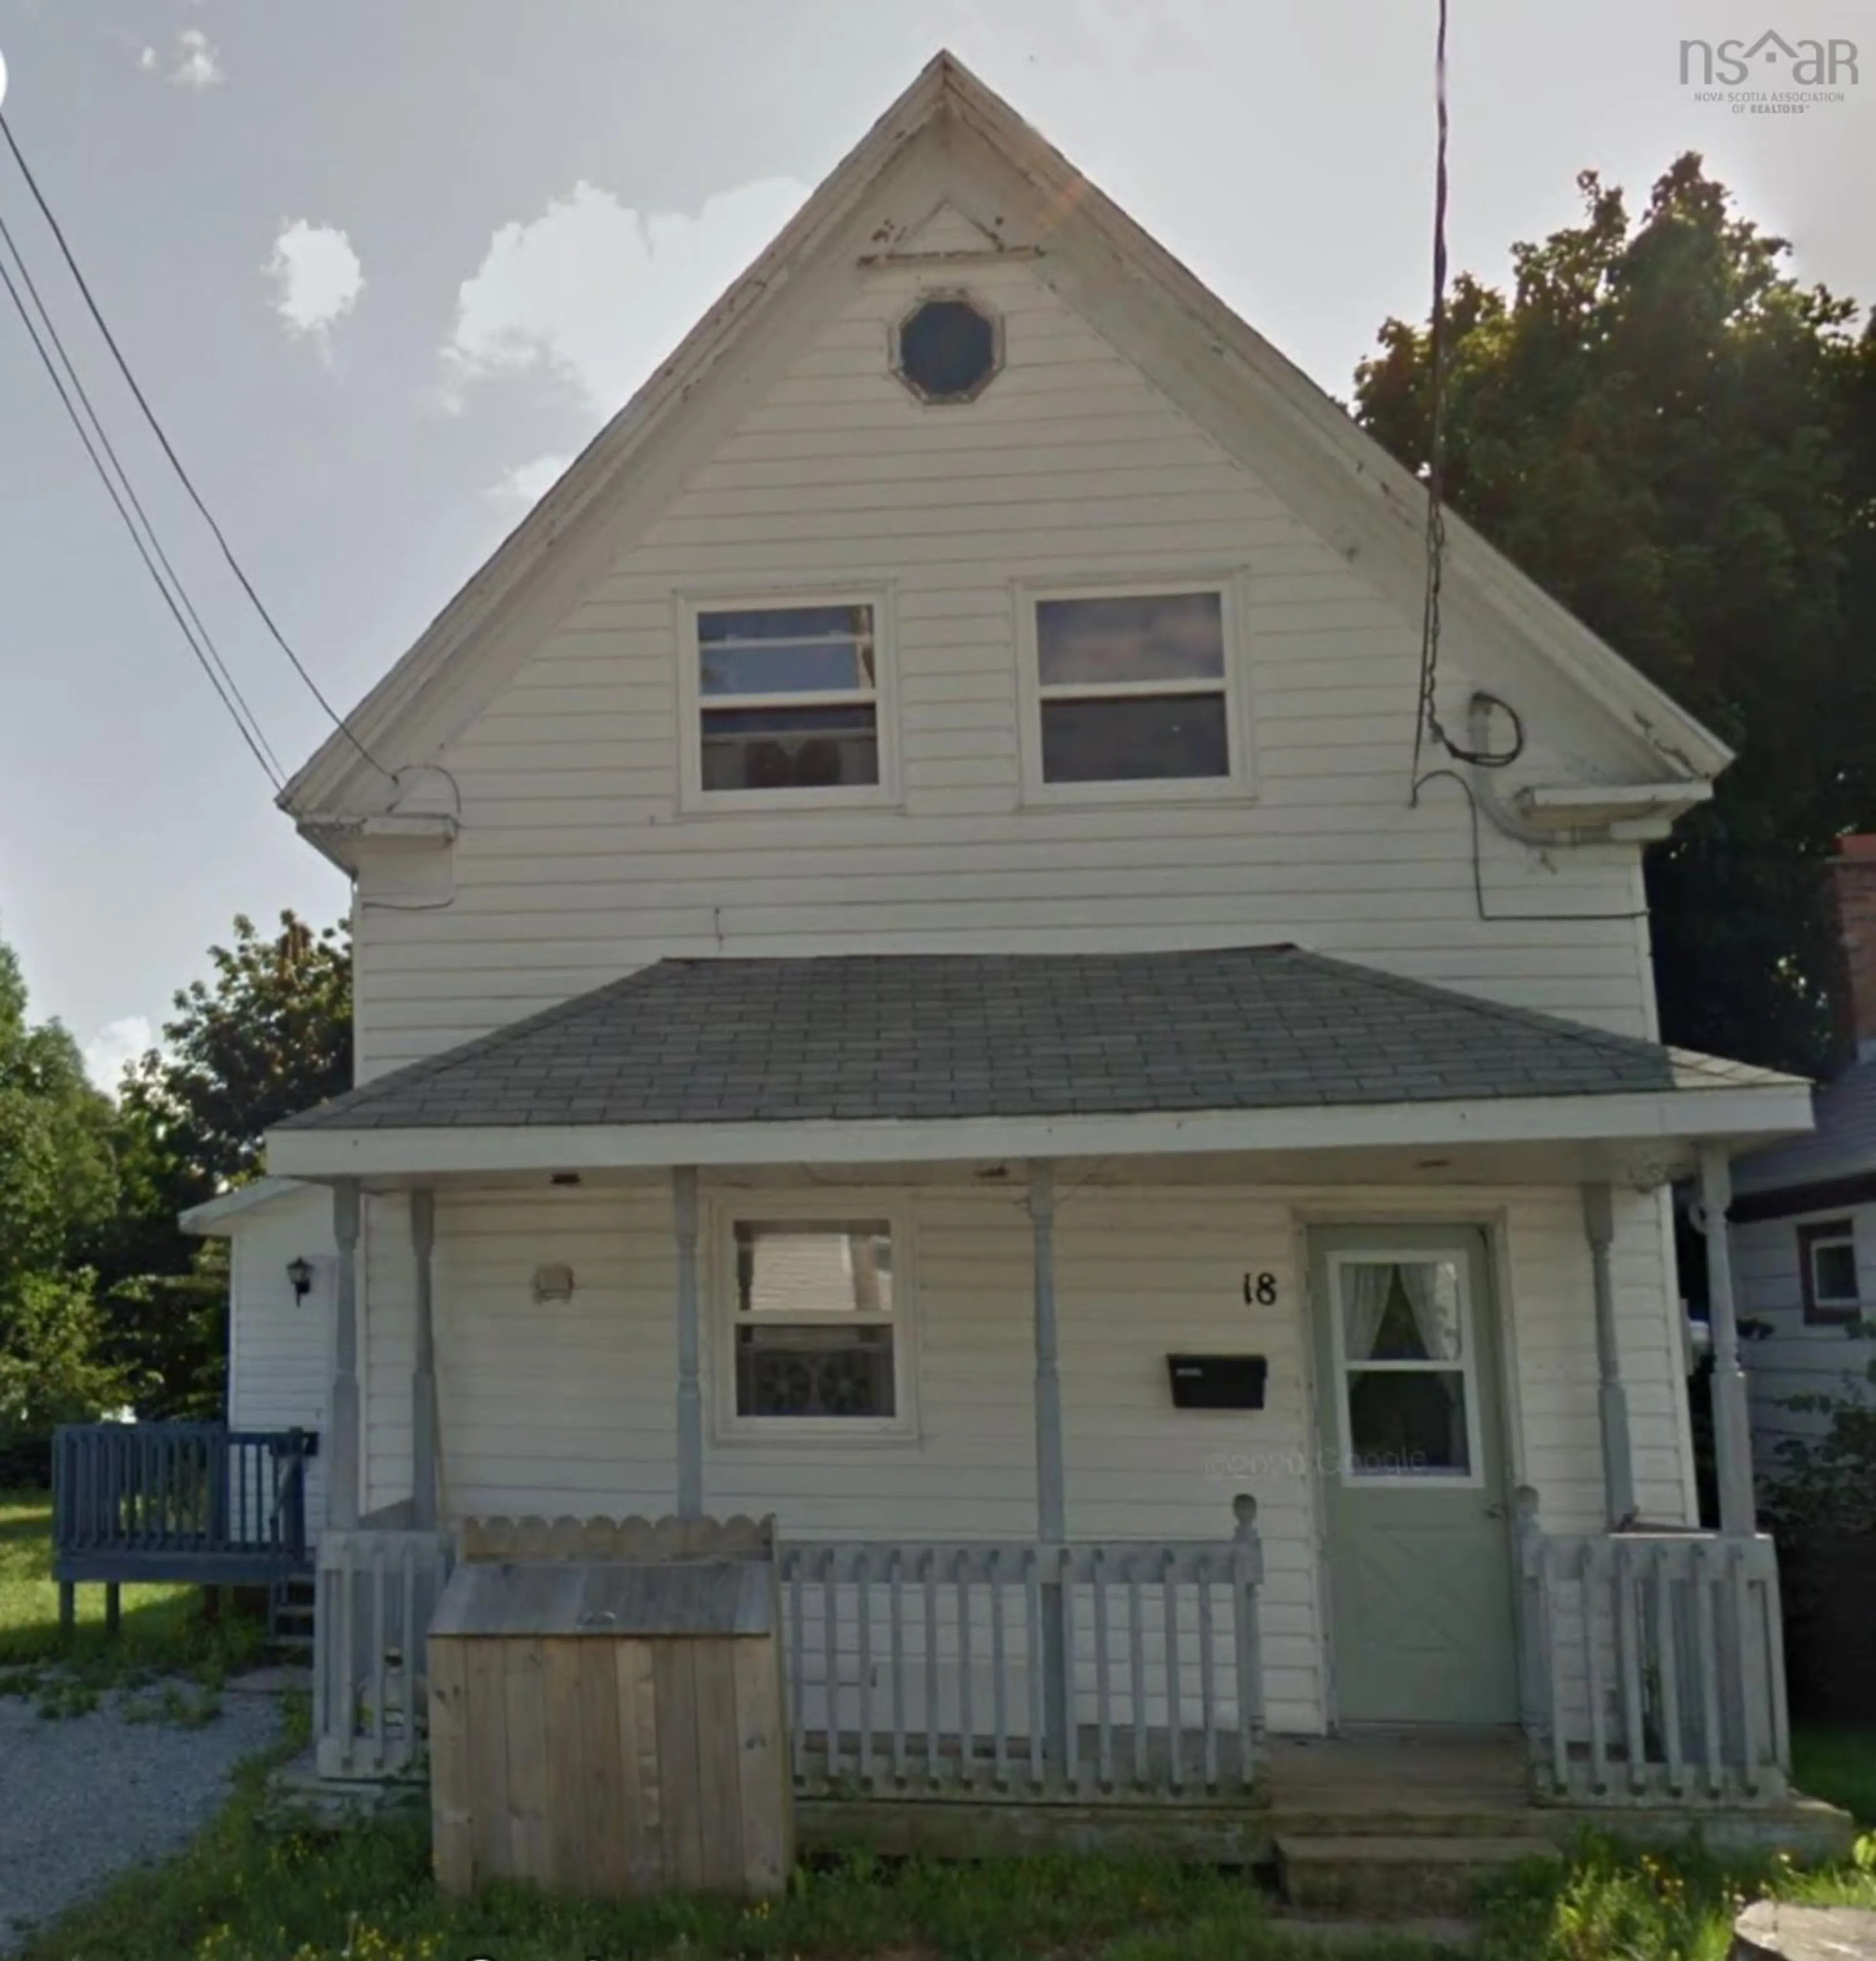 Home with unknown exterior material for 16/18 Ingraham St, North Sydney Nova Scotia B2A 2M1